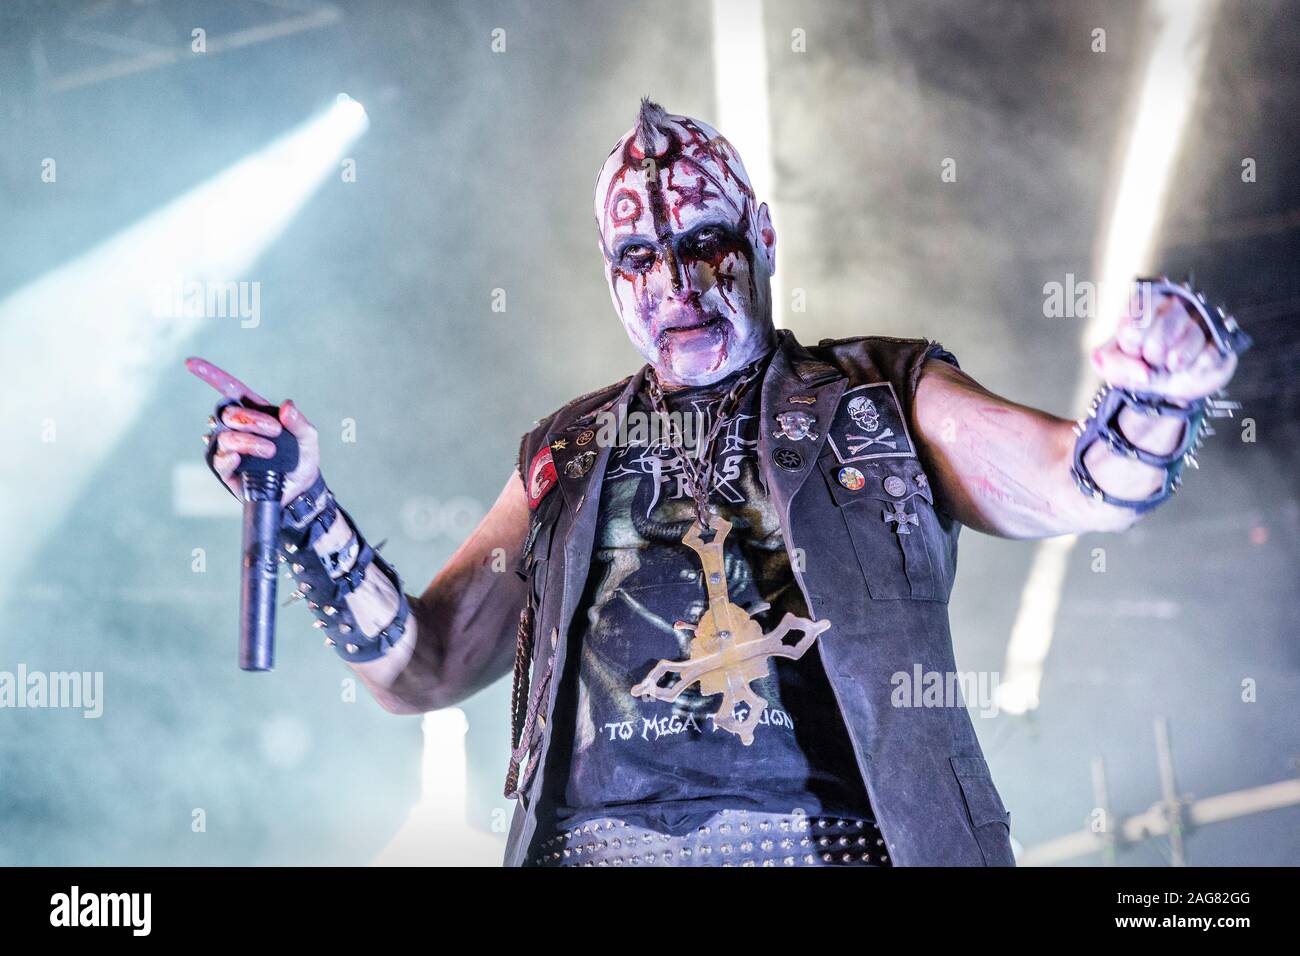 Oslo, Norway. 28th, June 2019. The Norwegian black metal band Mayhem performs a live concert during the Norwegian music festival Tons of Rock 2019 in Oslo. Here vocalist Attila Csihar is seen live on stage. (Photo credit: Gonzales Photo - Terje Dokken). Stock Photo